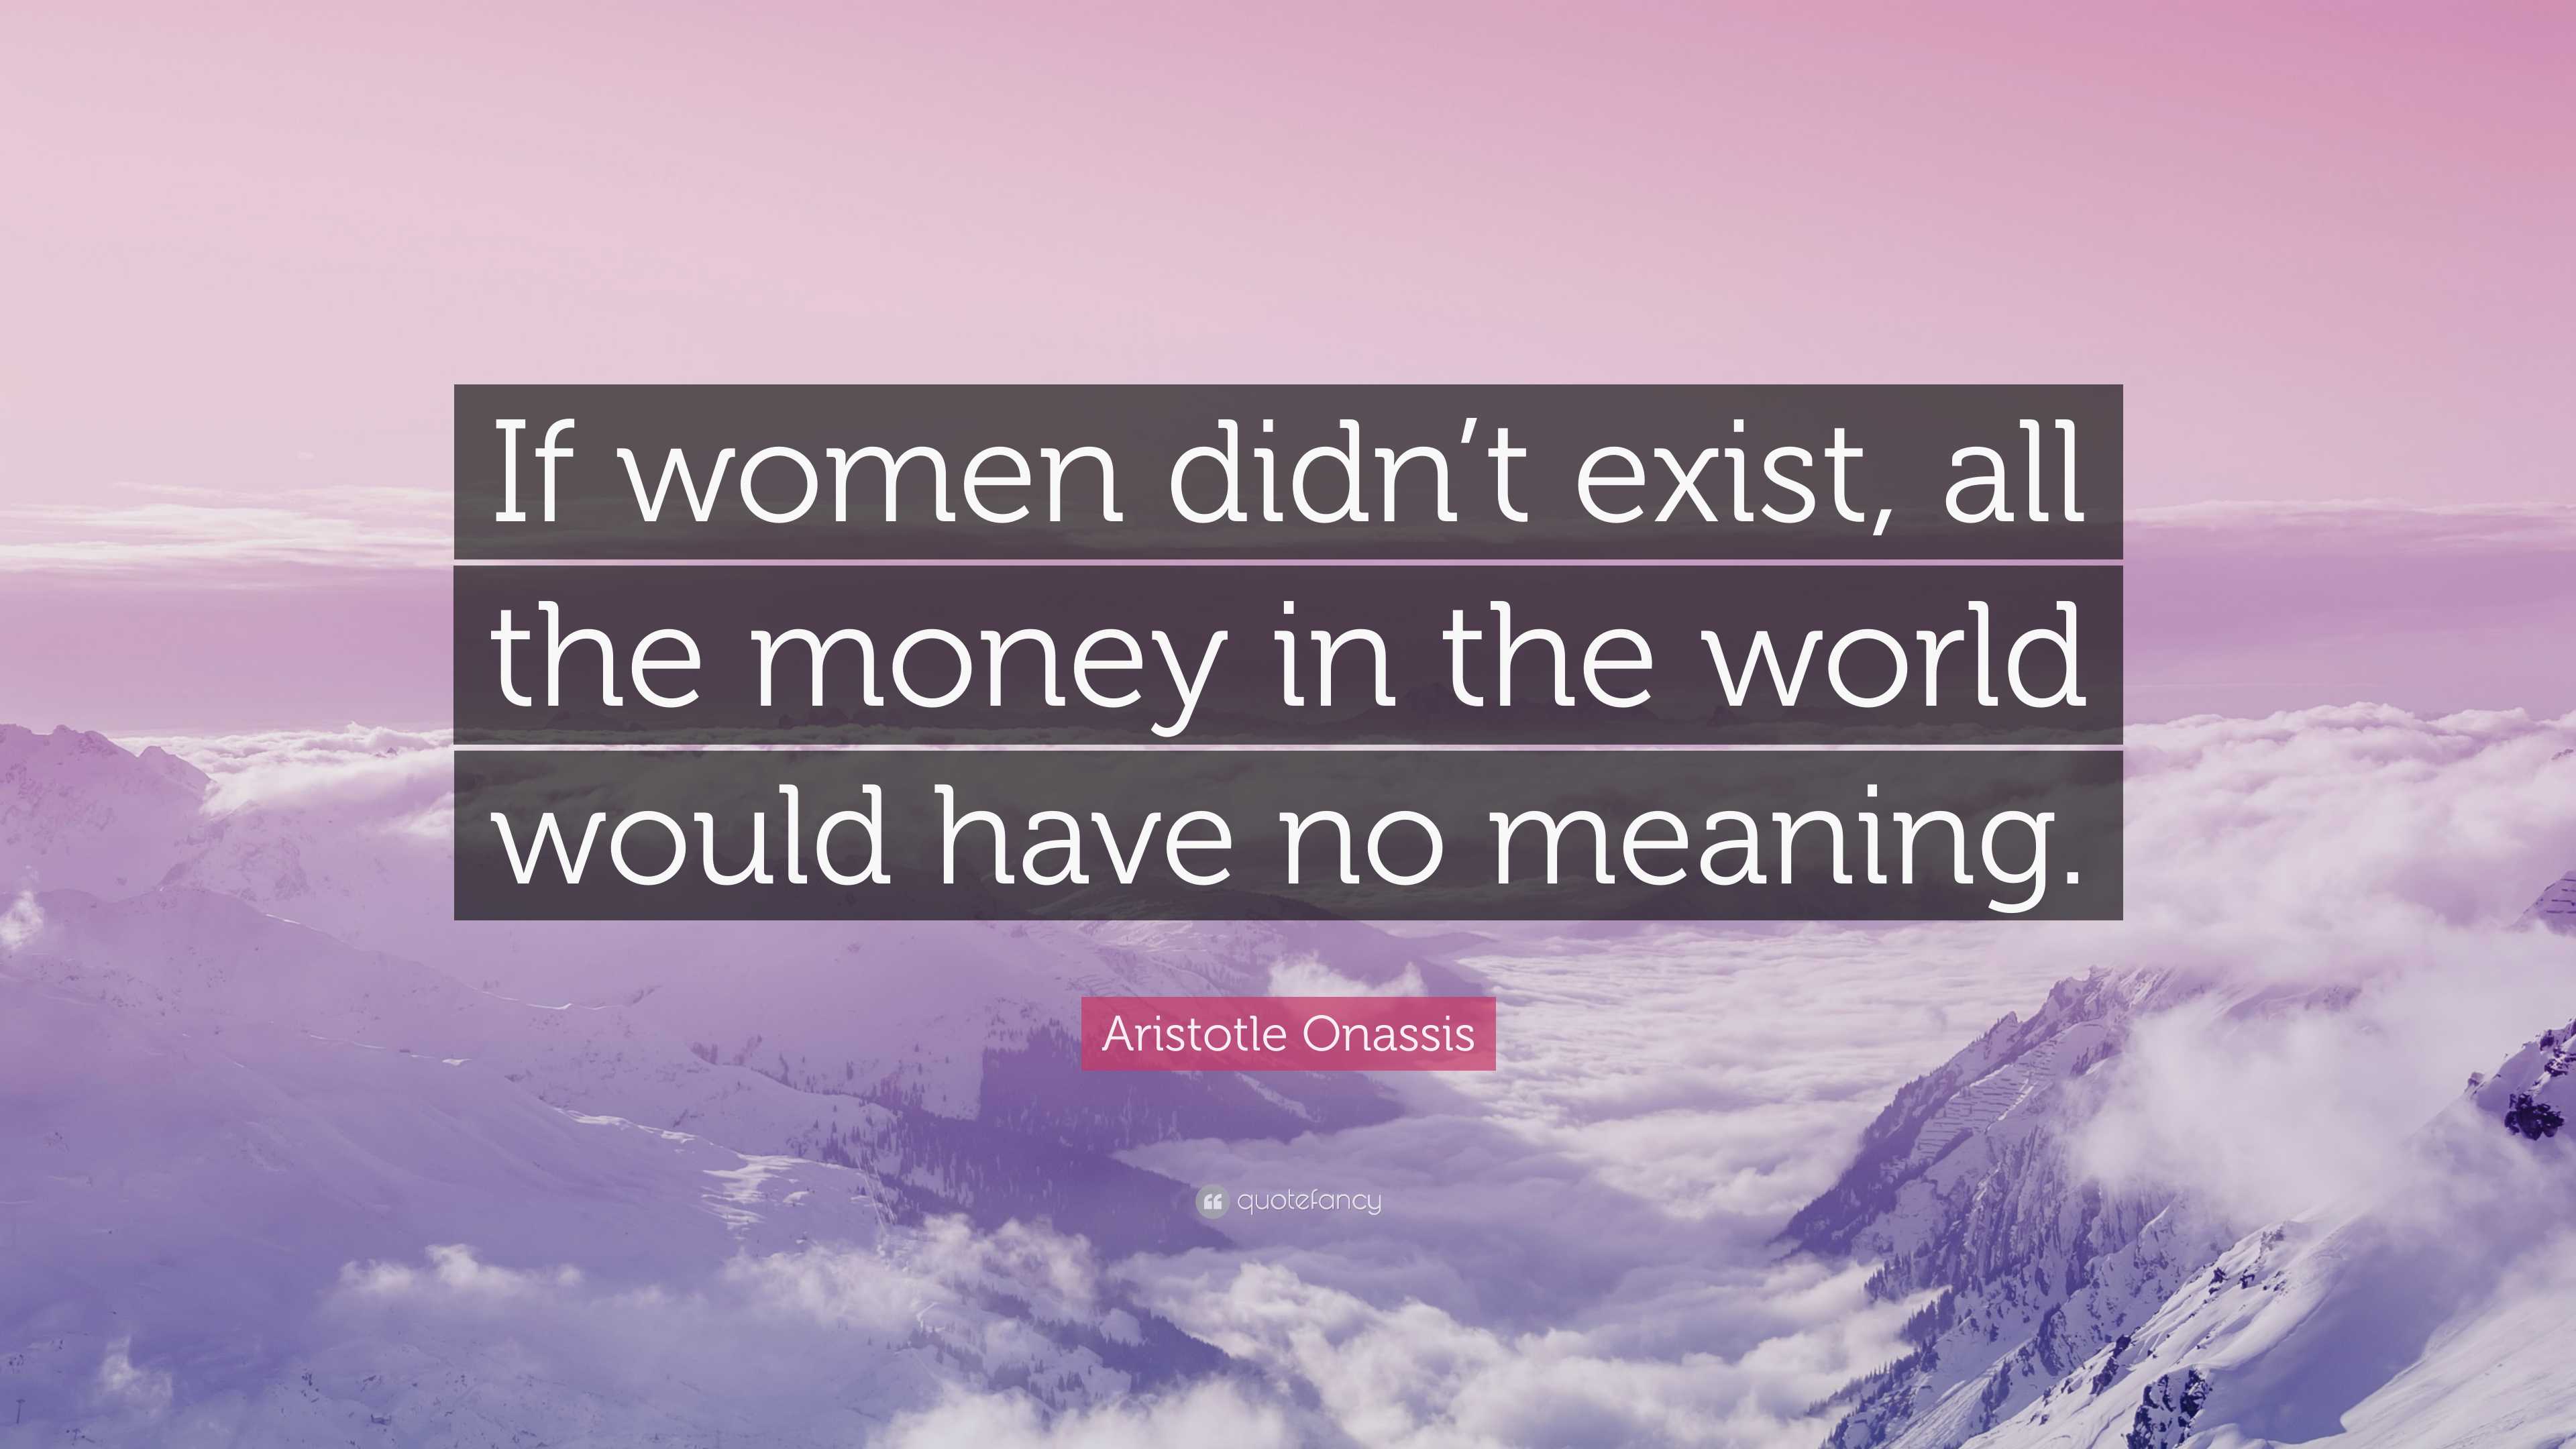 EUTS Phra Arthit Rd. Bkk TH on Instagram: “If women didn't exist, all the  money in the world would have no meaning.”